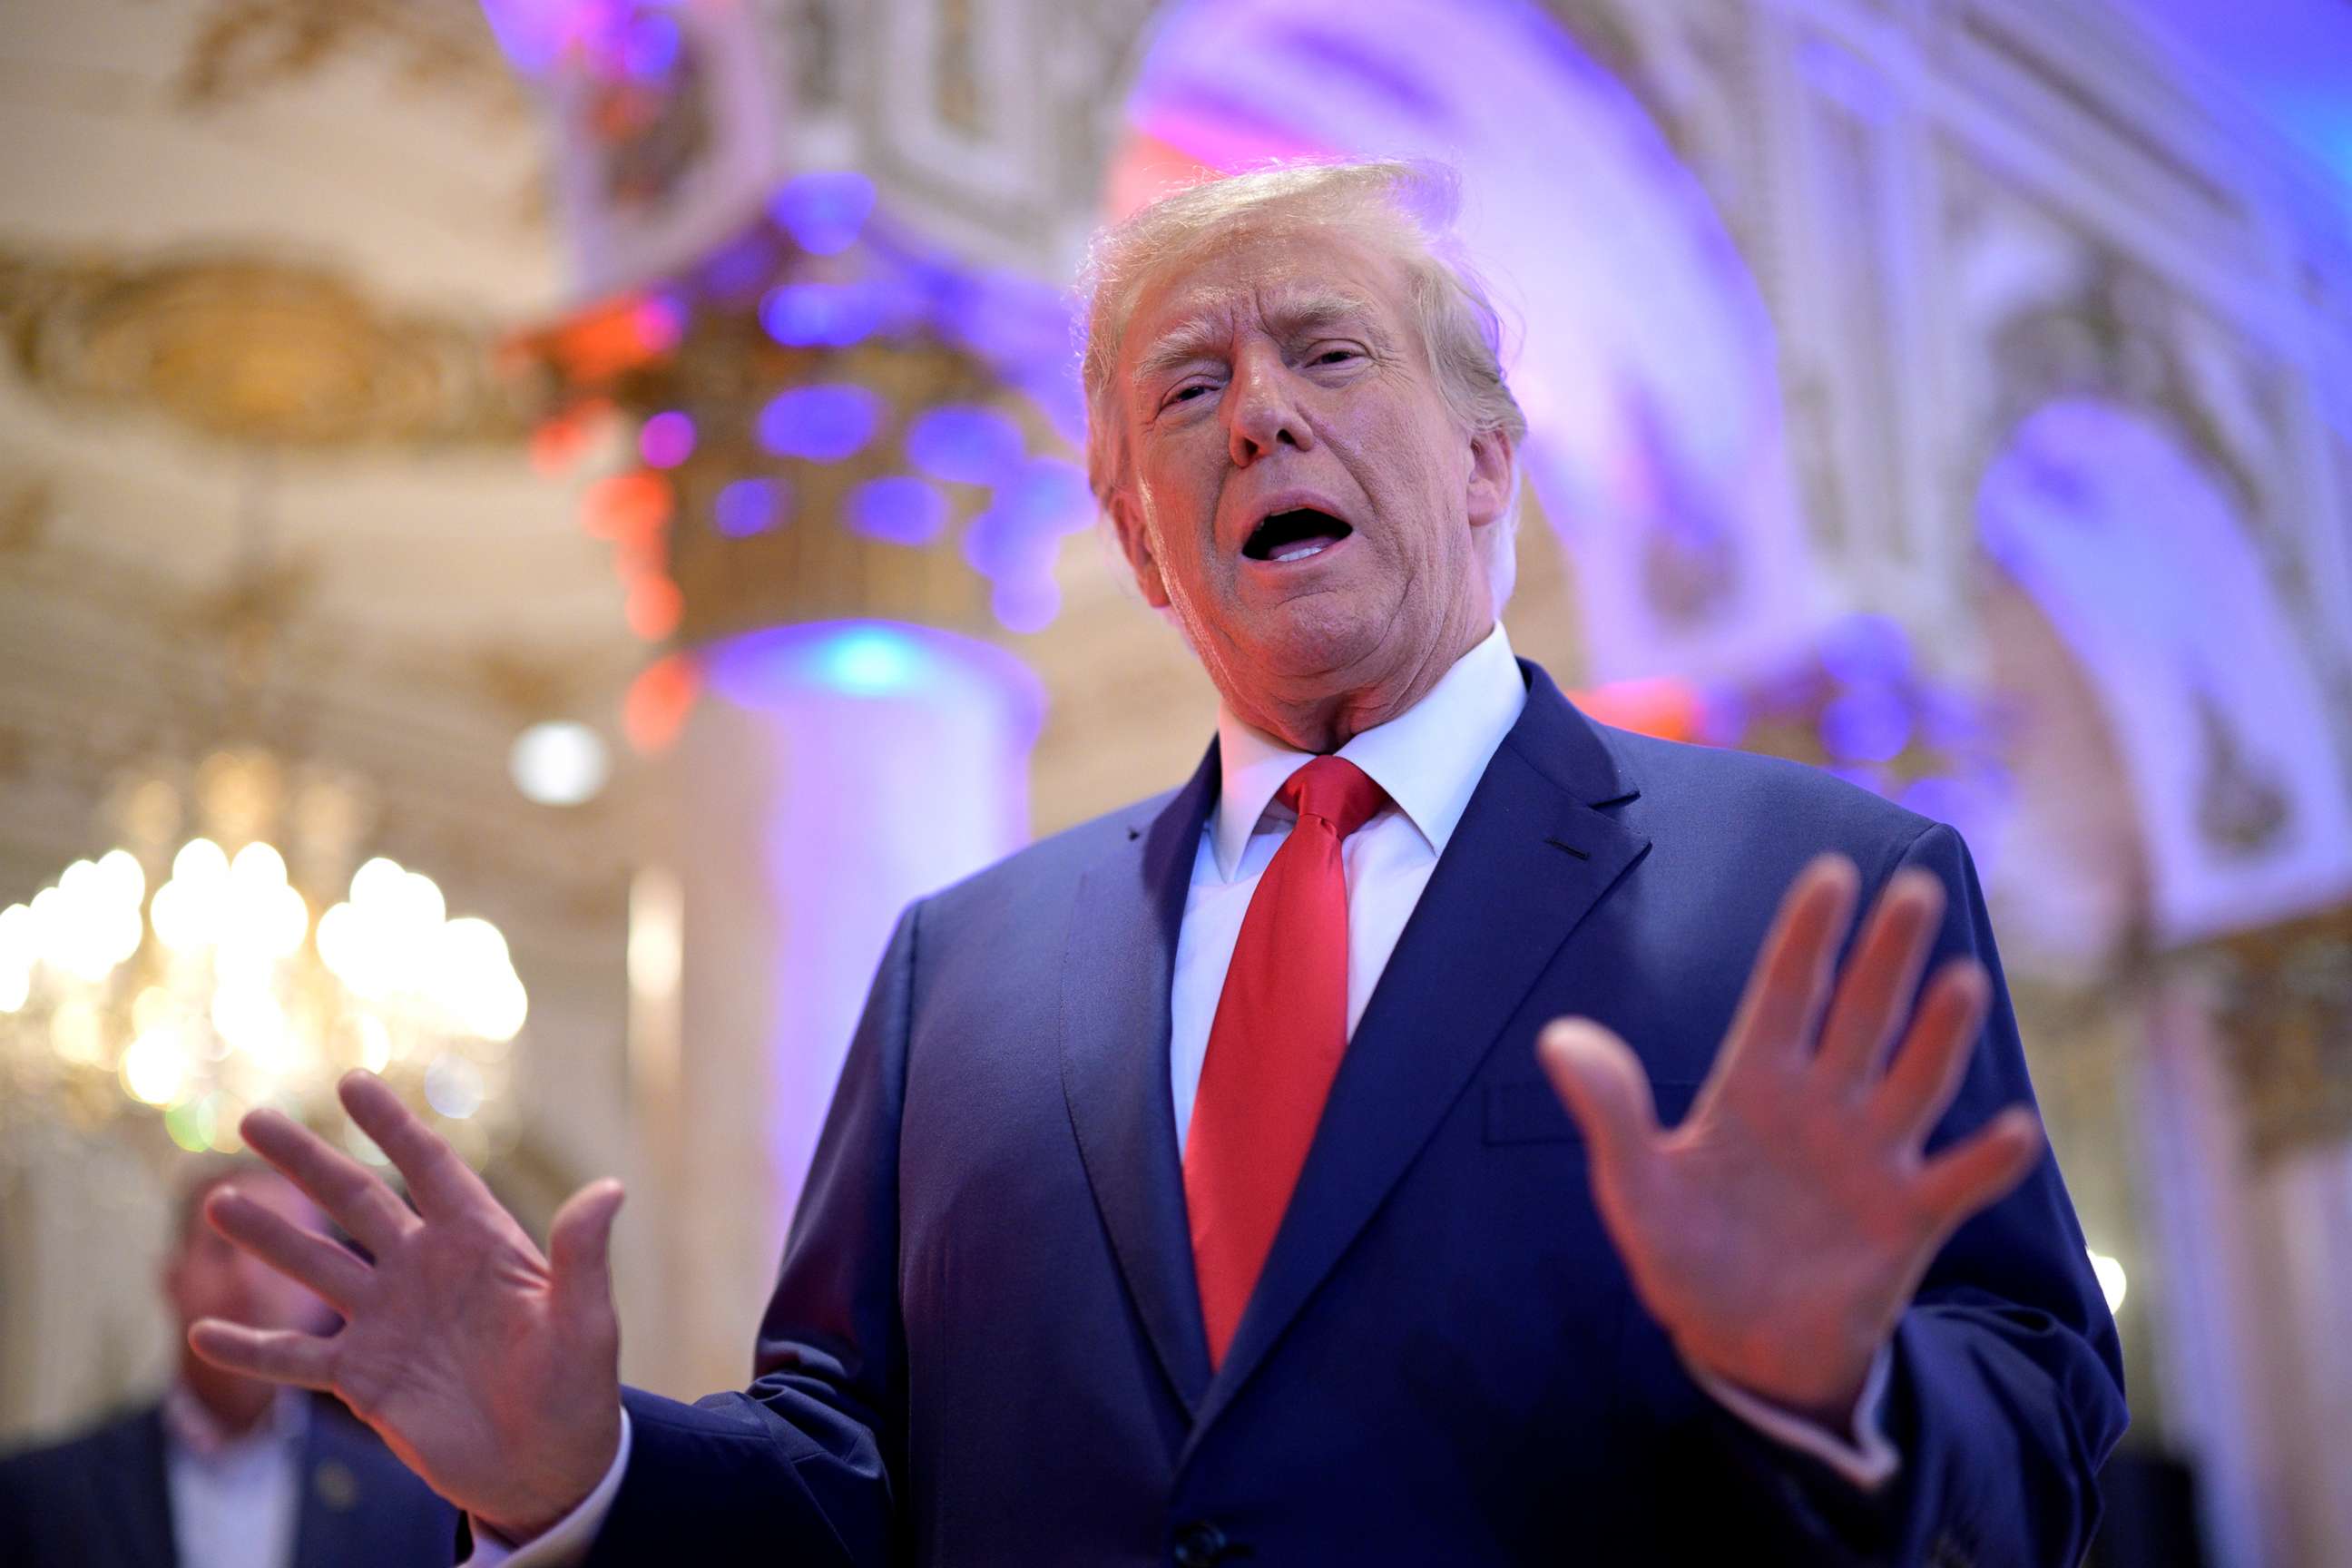 PHOTO: In this Nov. 8, 2022, file photo, former President Donald Trump answers questions from reporters during an election night party at Mar-a-Lago, in Palm Beach, Fla.